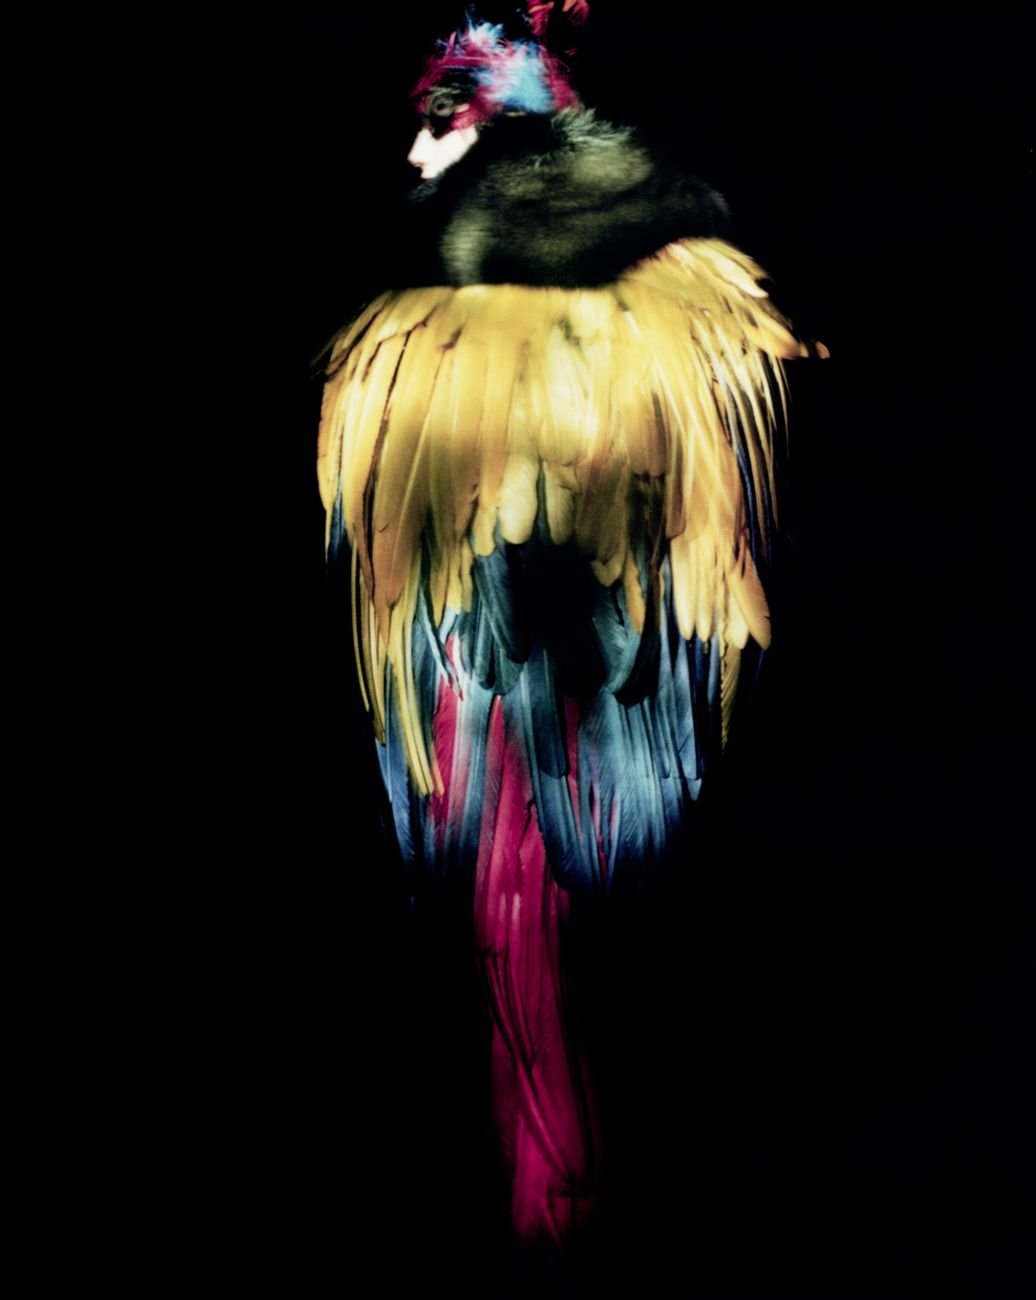 Kimoja ensemble Spring-Summer 1997 Haute Couture collection by John Galliano - First published in W Magazine April 1997 ® Paolo Roversi